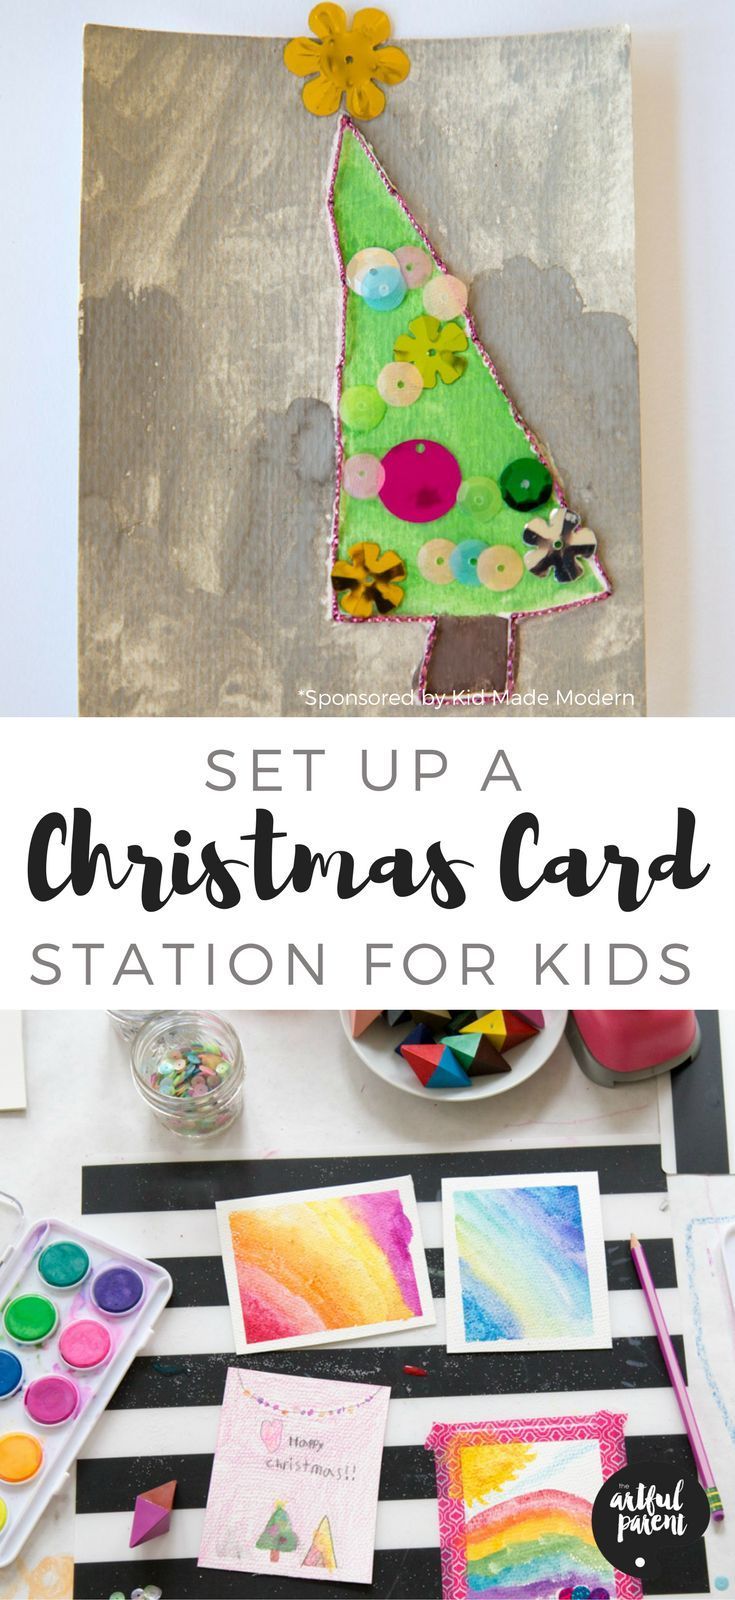 A Homemade Christmas Card Making Station for Kids -   24 homemade crafts supplies
 ideas